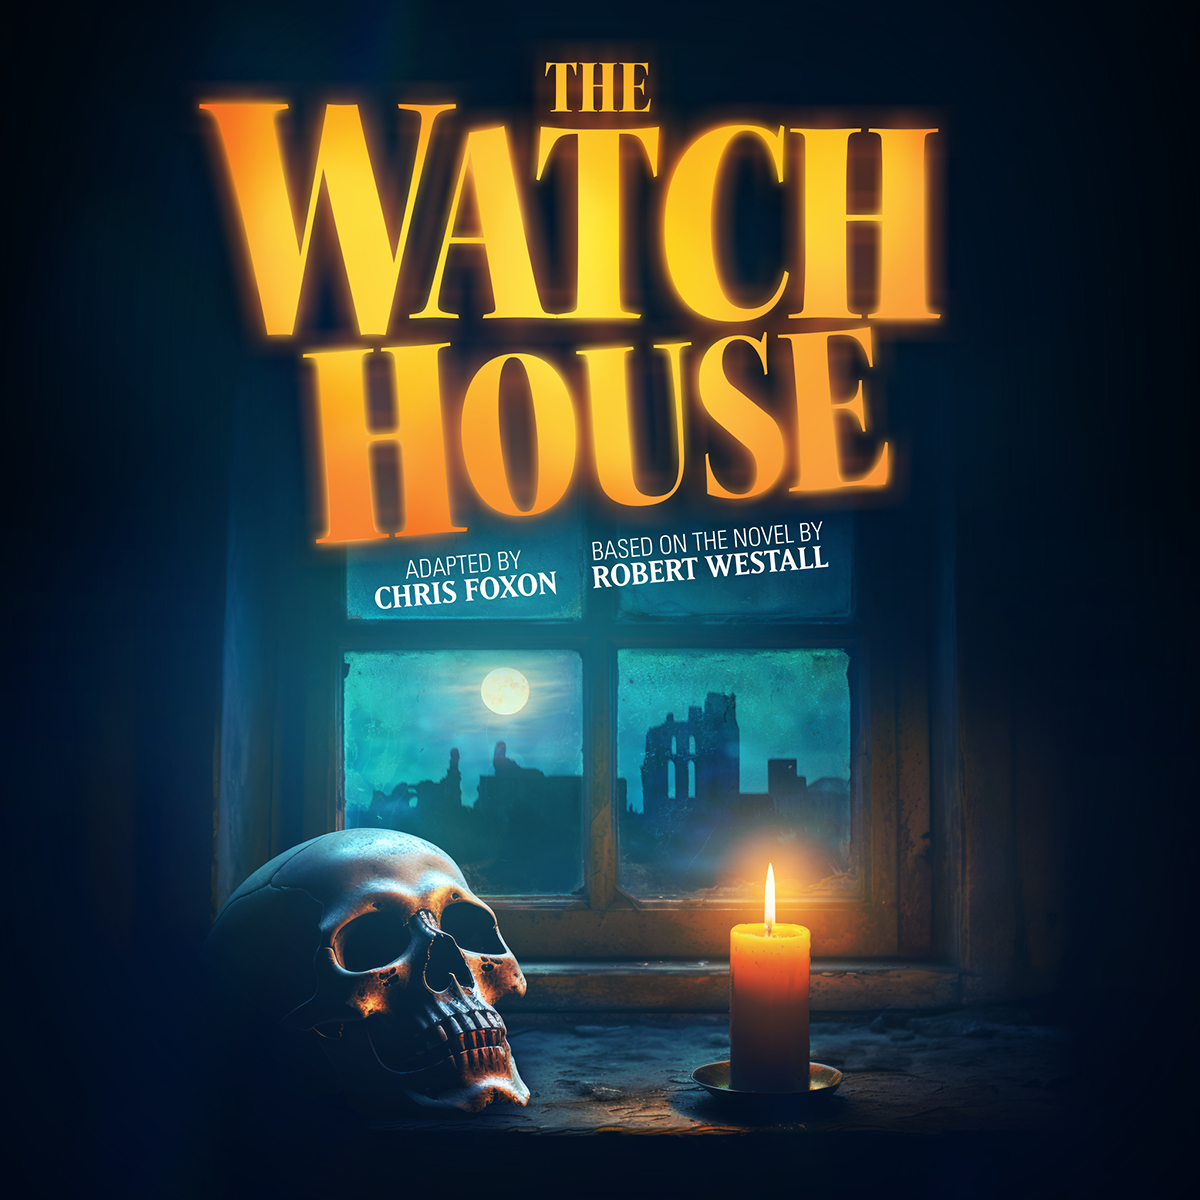 TOUR ANNOUNCED! The Watch House, adapted by Chris Foxon from Carnegie Medal-winner Robert Westall’s classic ghost story, will haunt 12 venues this autumn. 'A smart and spooky festive treat.' The Stage papatango.co.uk/the-watch-hous…